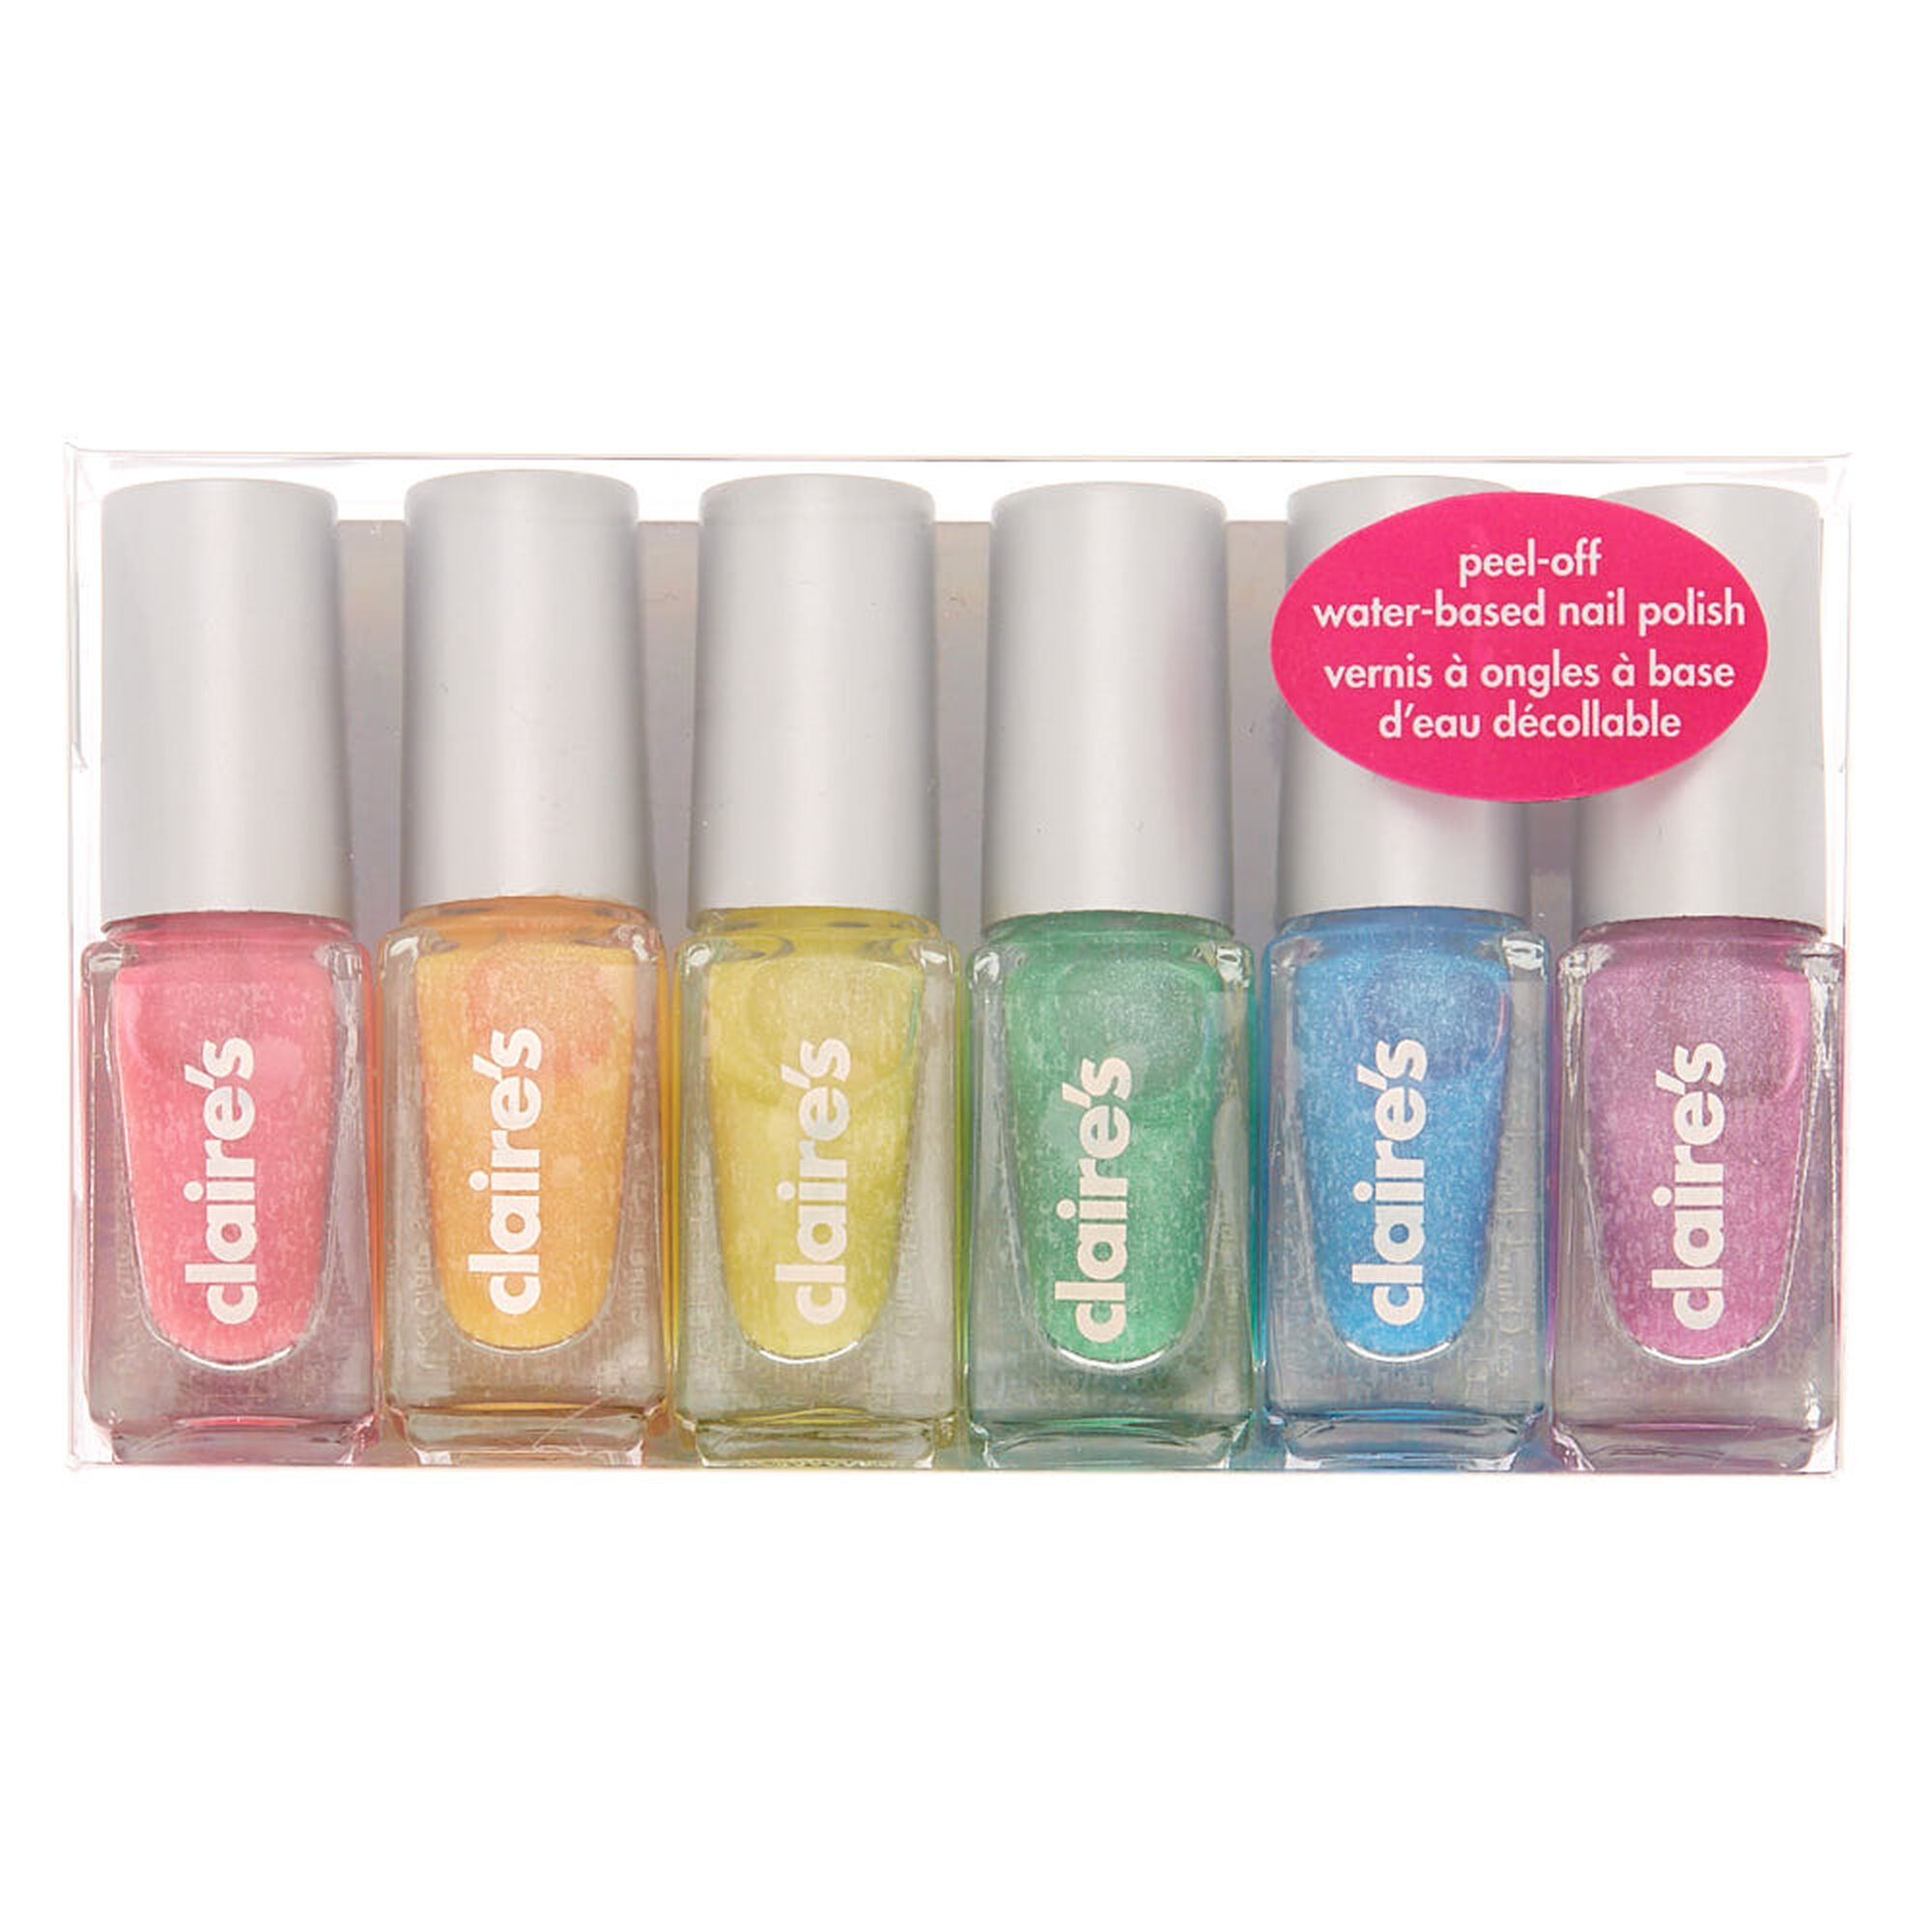 Review: Claire's Mood Changing Nail Polish